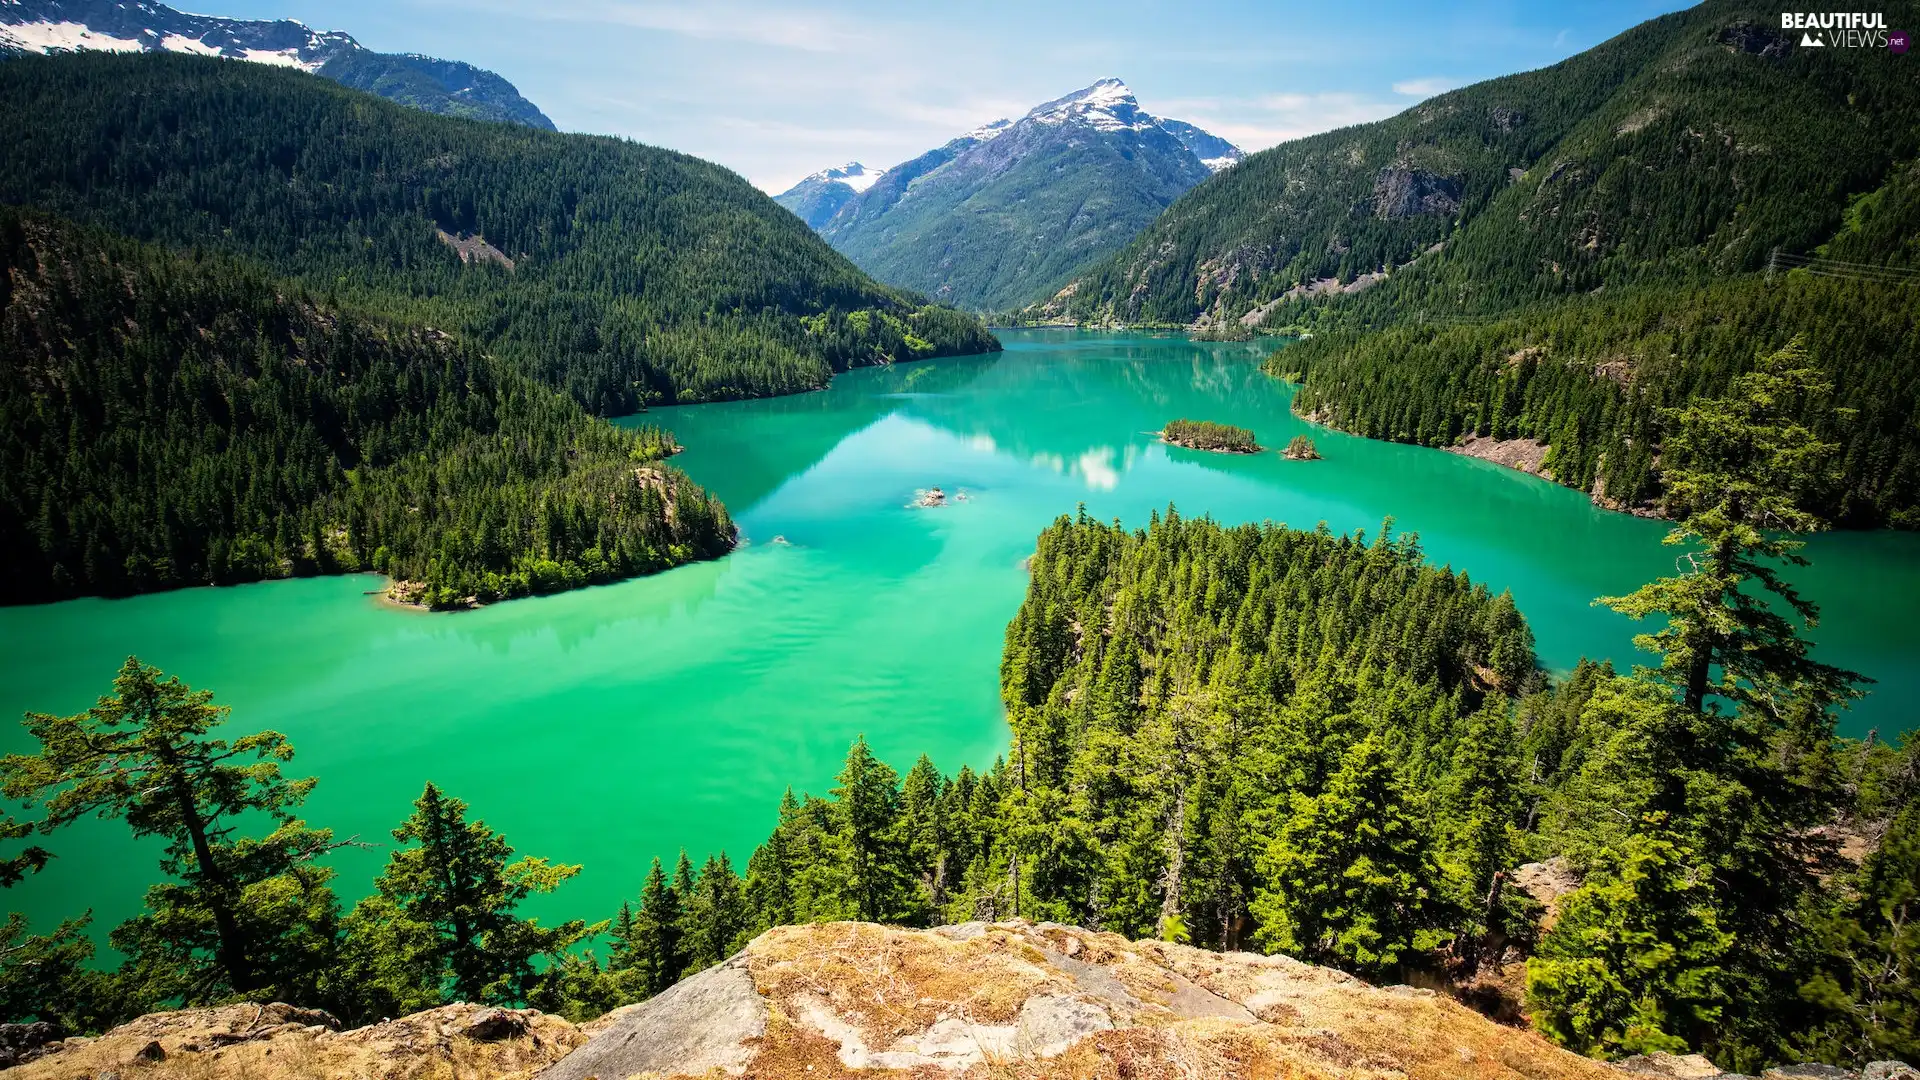 North Cascades National Park, Mountains, viewes, Diablo Lake, trees, Washington State, The United States, Islets